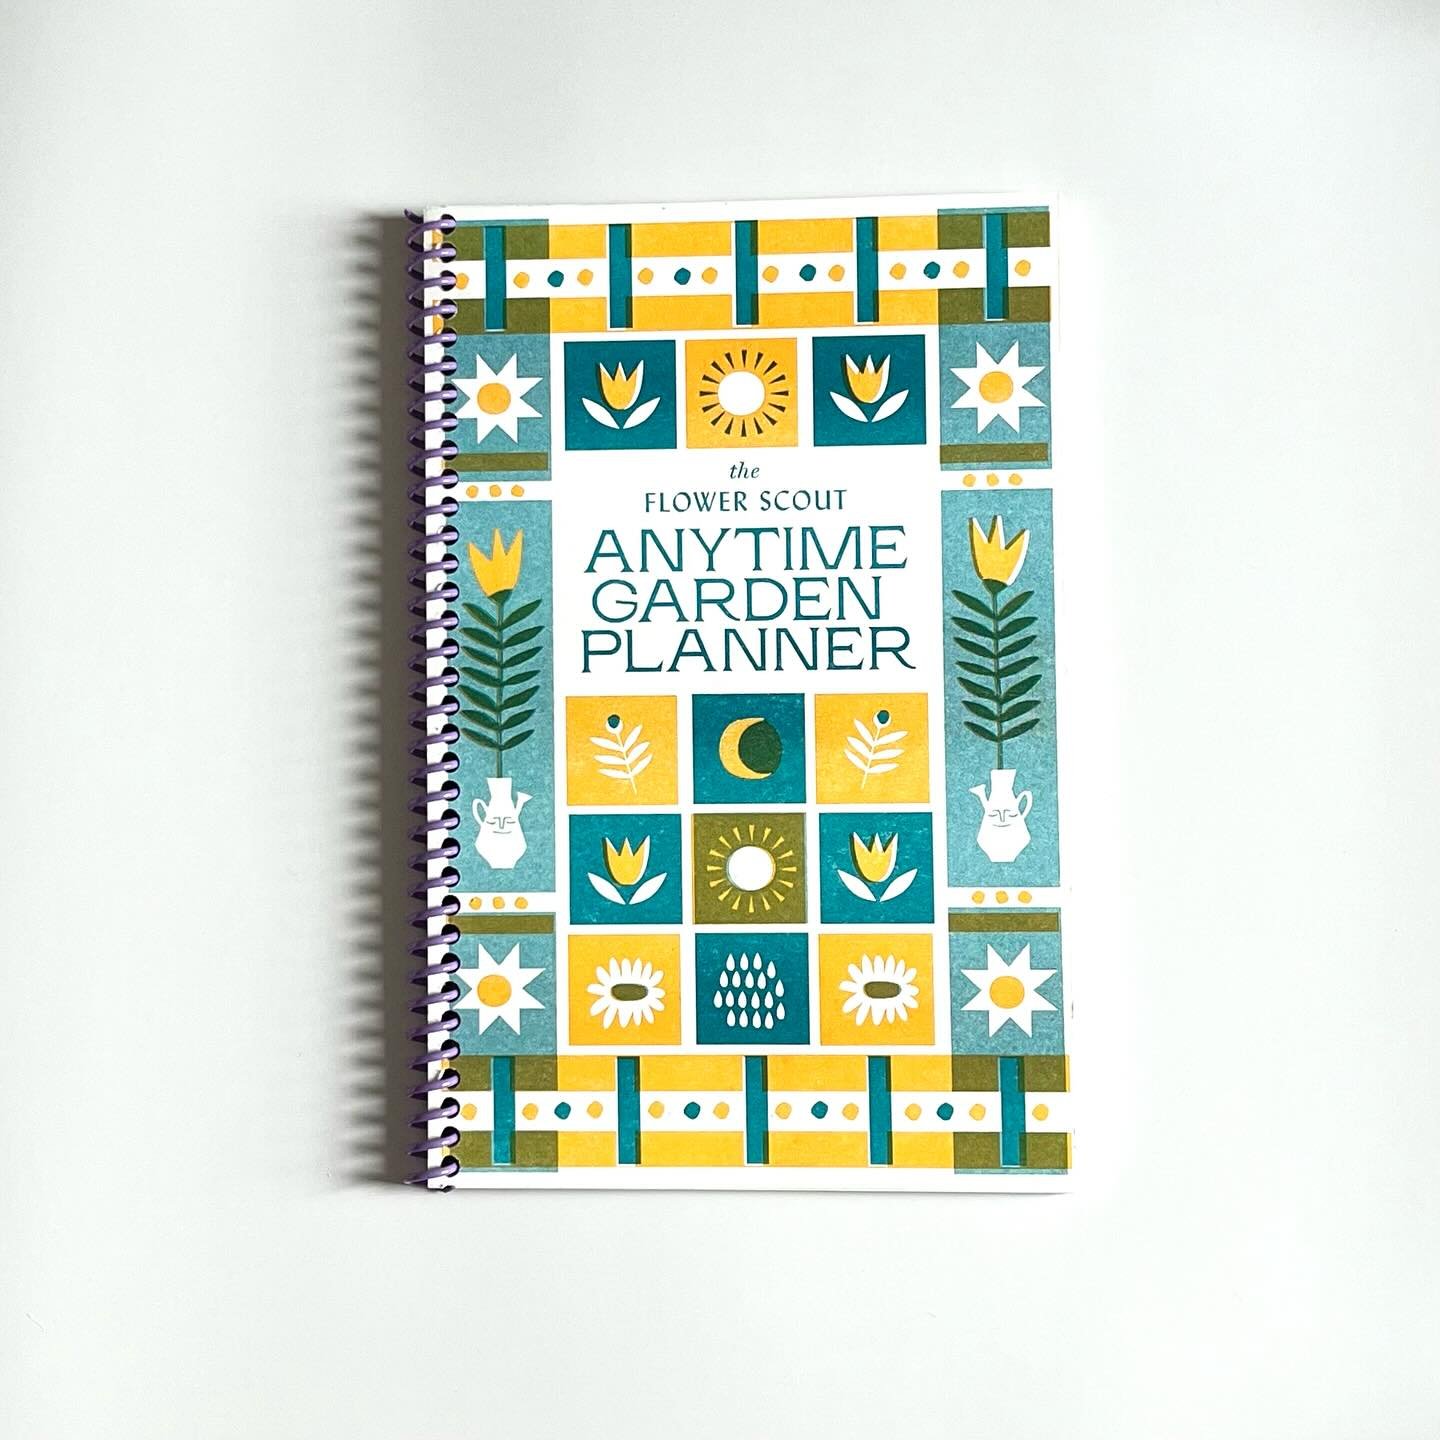 Excited to share this new project I&rsquo;ve been working on with @flowerscout for the last month. The Anytime Garden planner is a handy and helpful undated garden notebook. It&rsquo;s filled with so much helpful info for each month of the year, incl